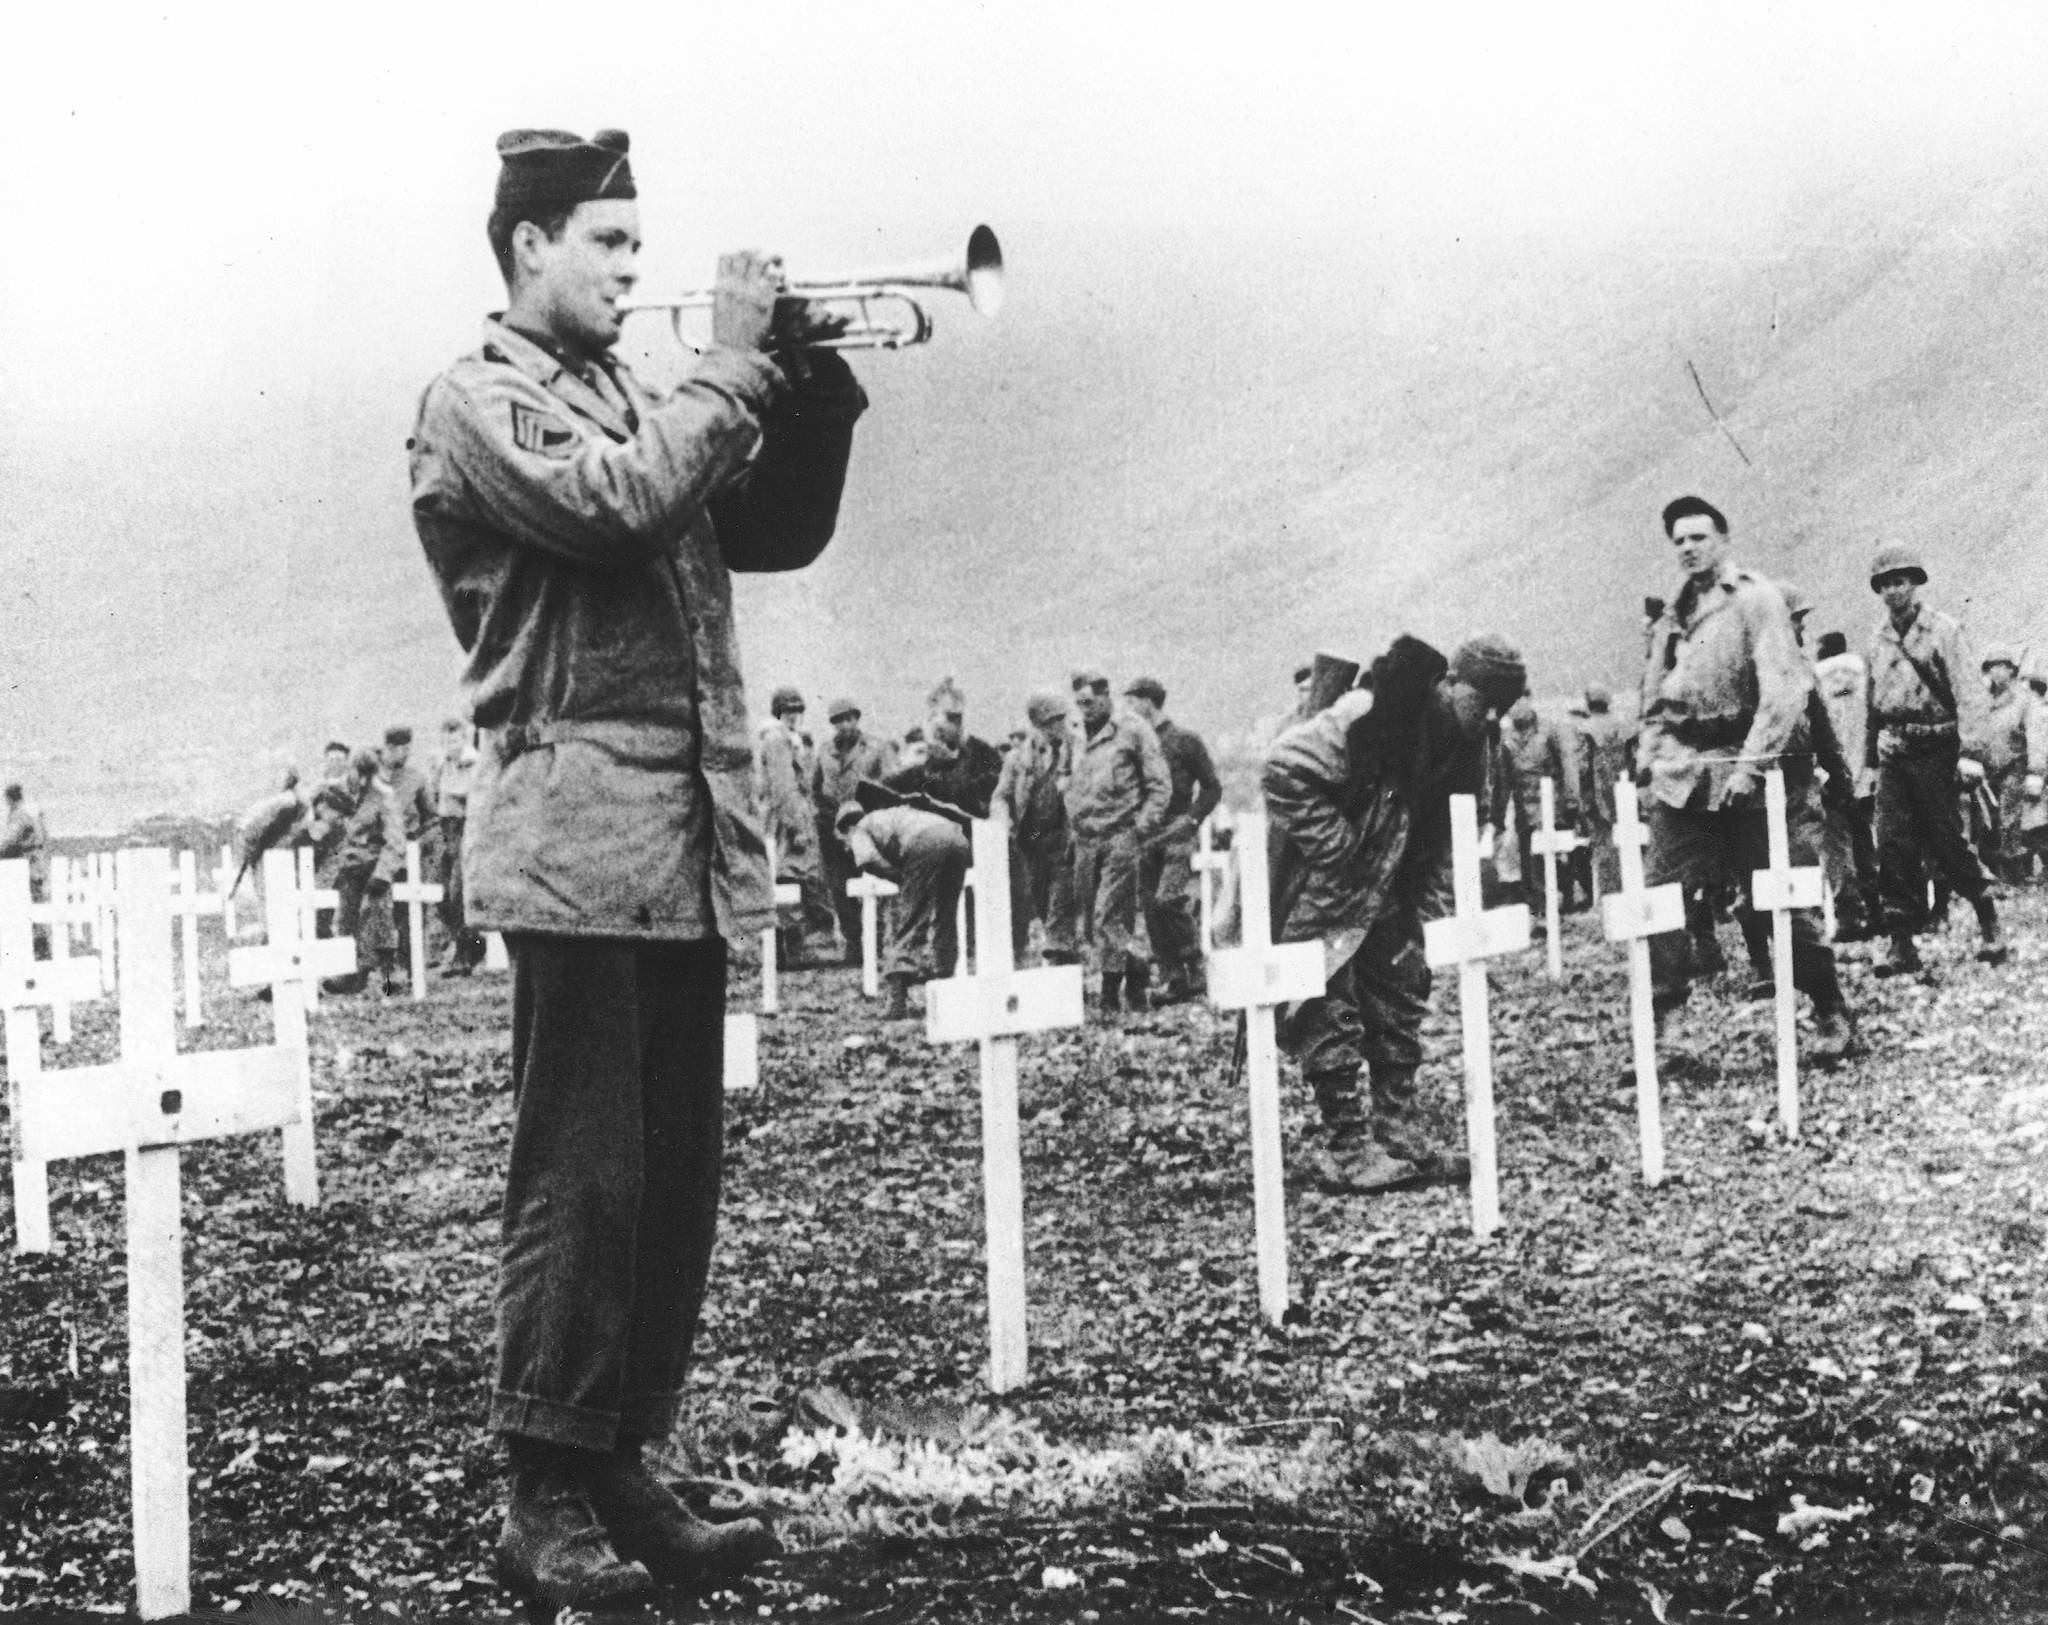 FILE - In this Aug. 1943 file photo, a bugler sounds taps during a memorial service while a group of G.I.s visit the graves of comrades who fell in the reconquest of Attu Island, part of the Aleutian Islands of Alaska. May 30, 2018 will mark the 75th anniversary of American forces recapturing Attu Island in Alaska’s Aleutian chain from Japanese forces. It was the only World War II battle fought on North American soil. (AP Photo, File)